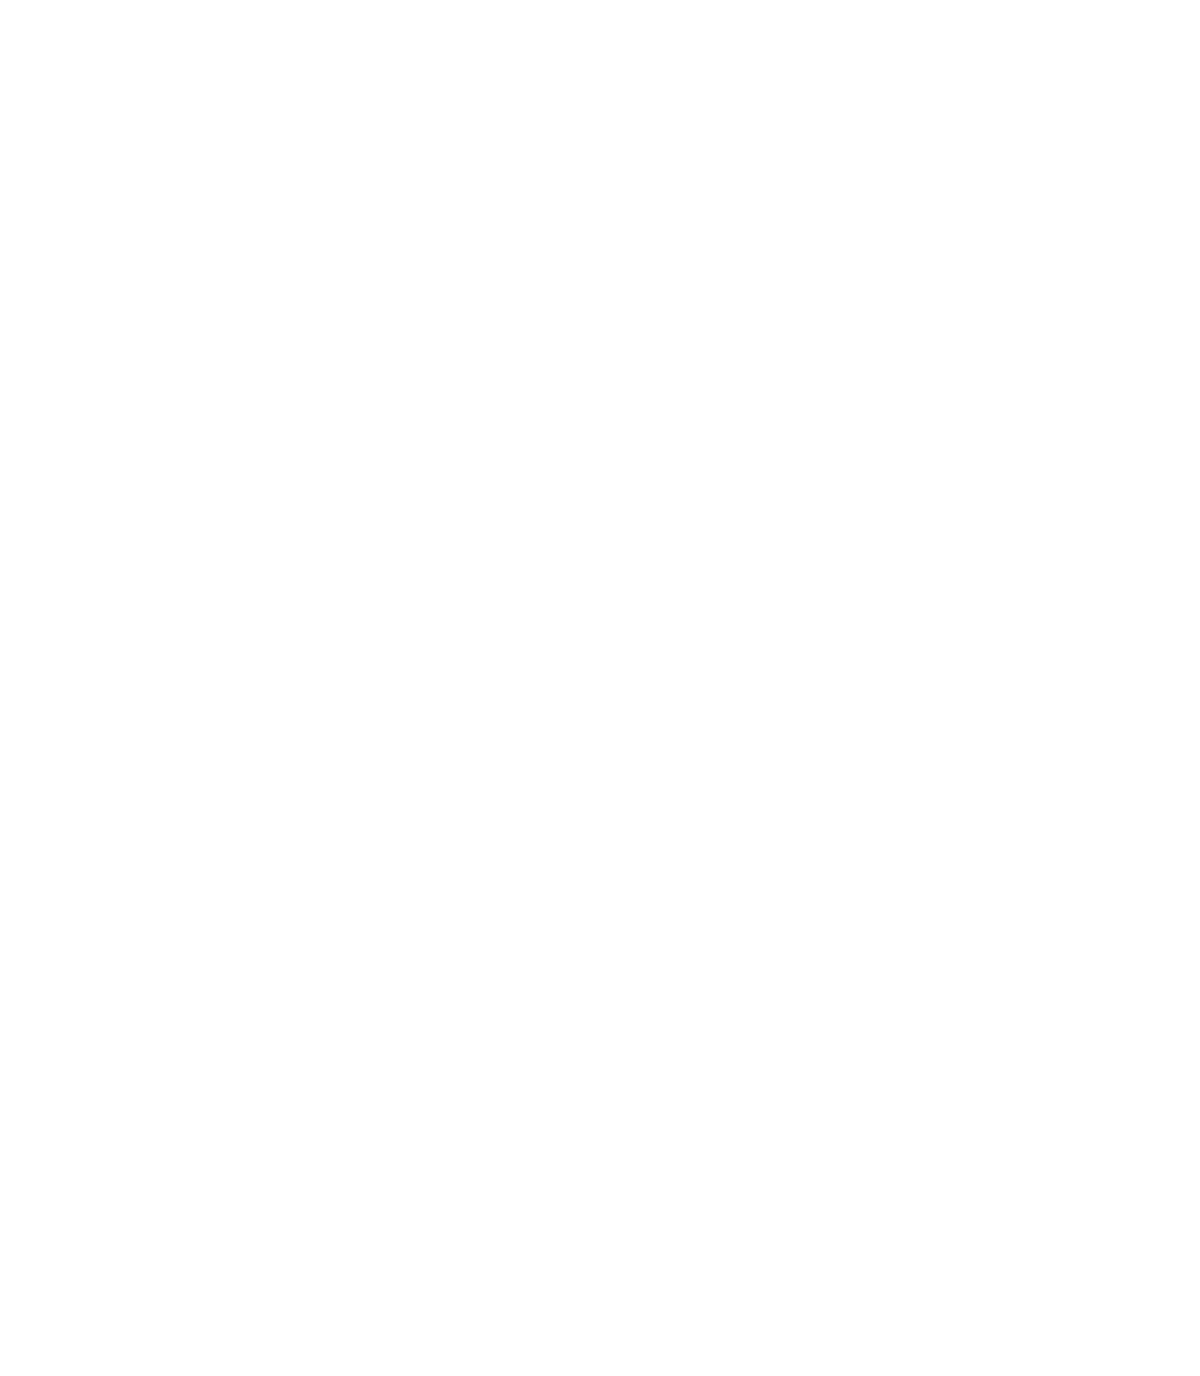 Logo of ATA (American Trucking Associations). Atlas International is affiliated with ATA.